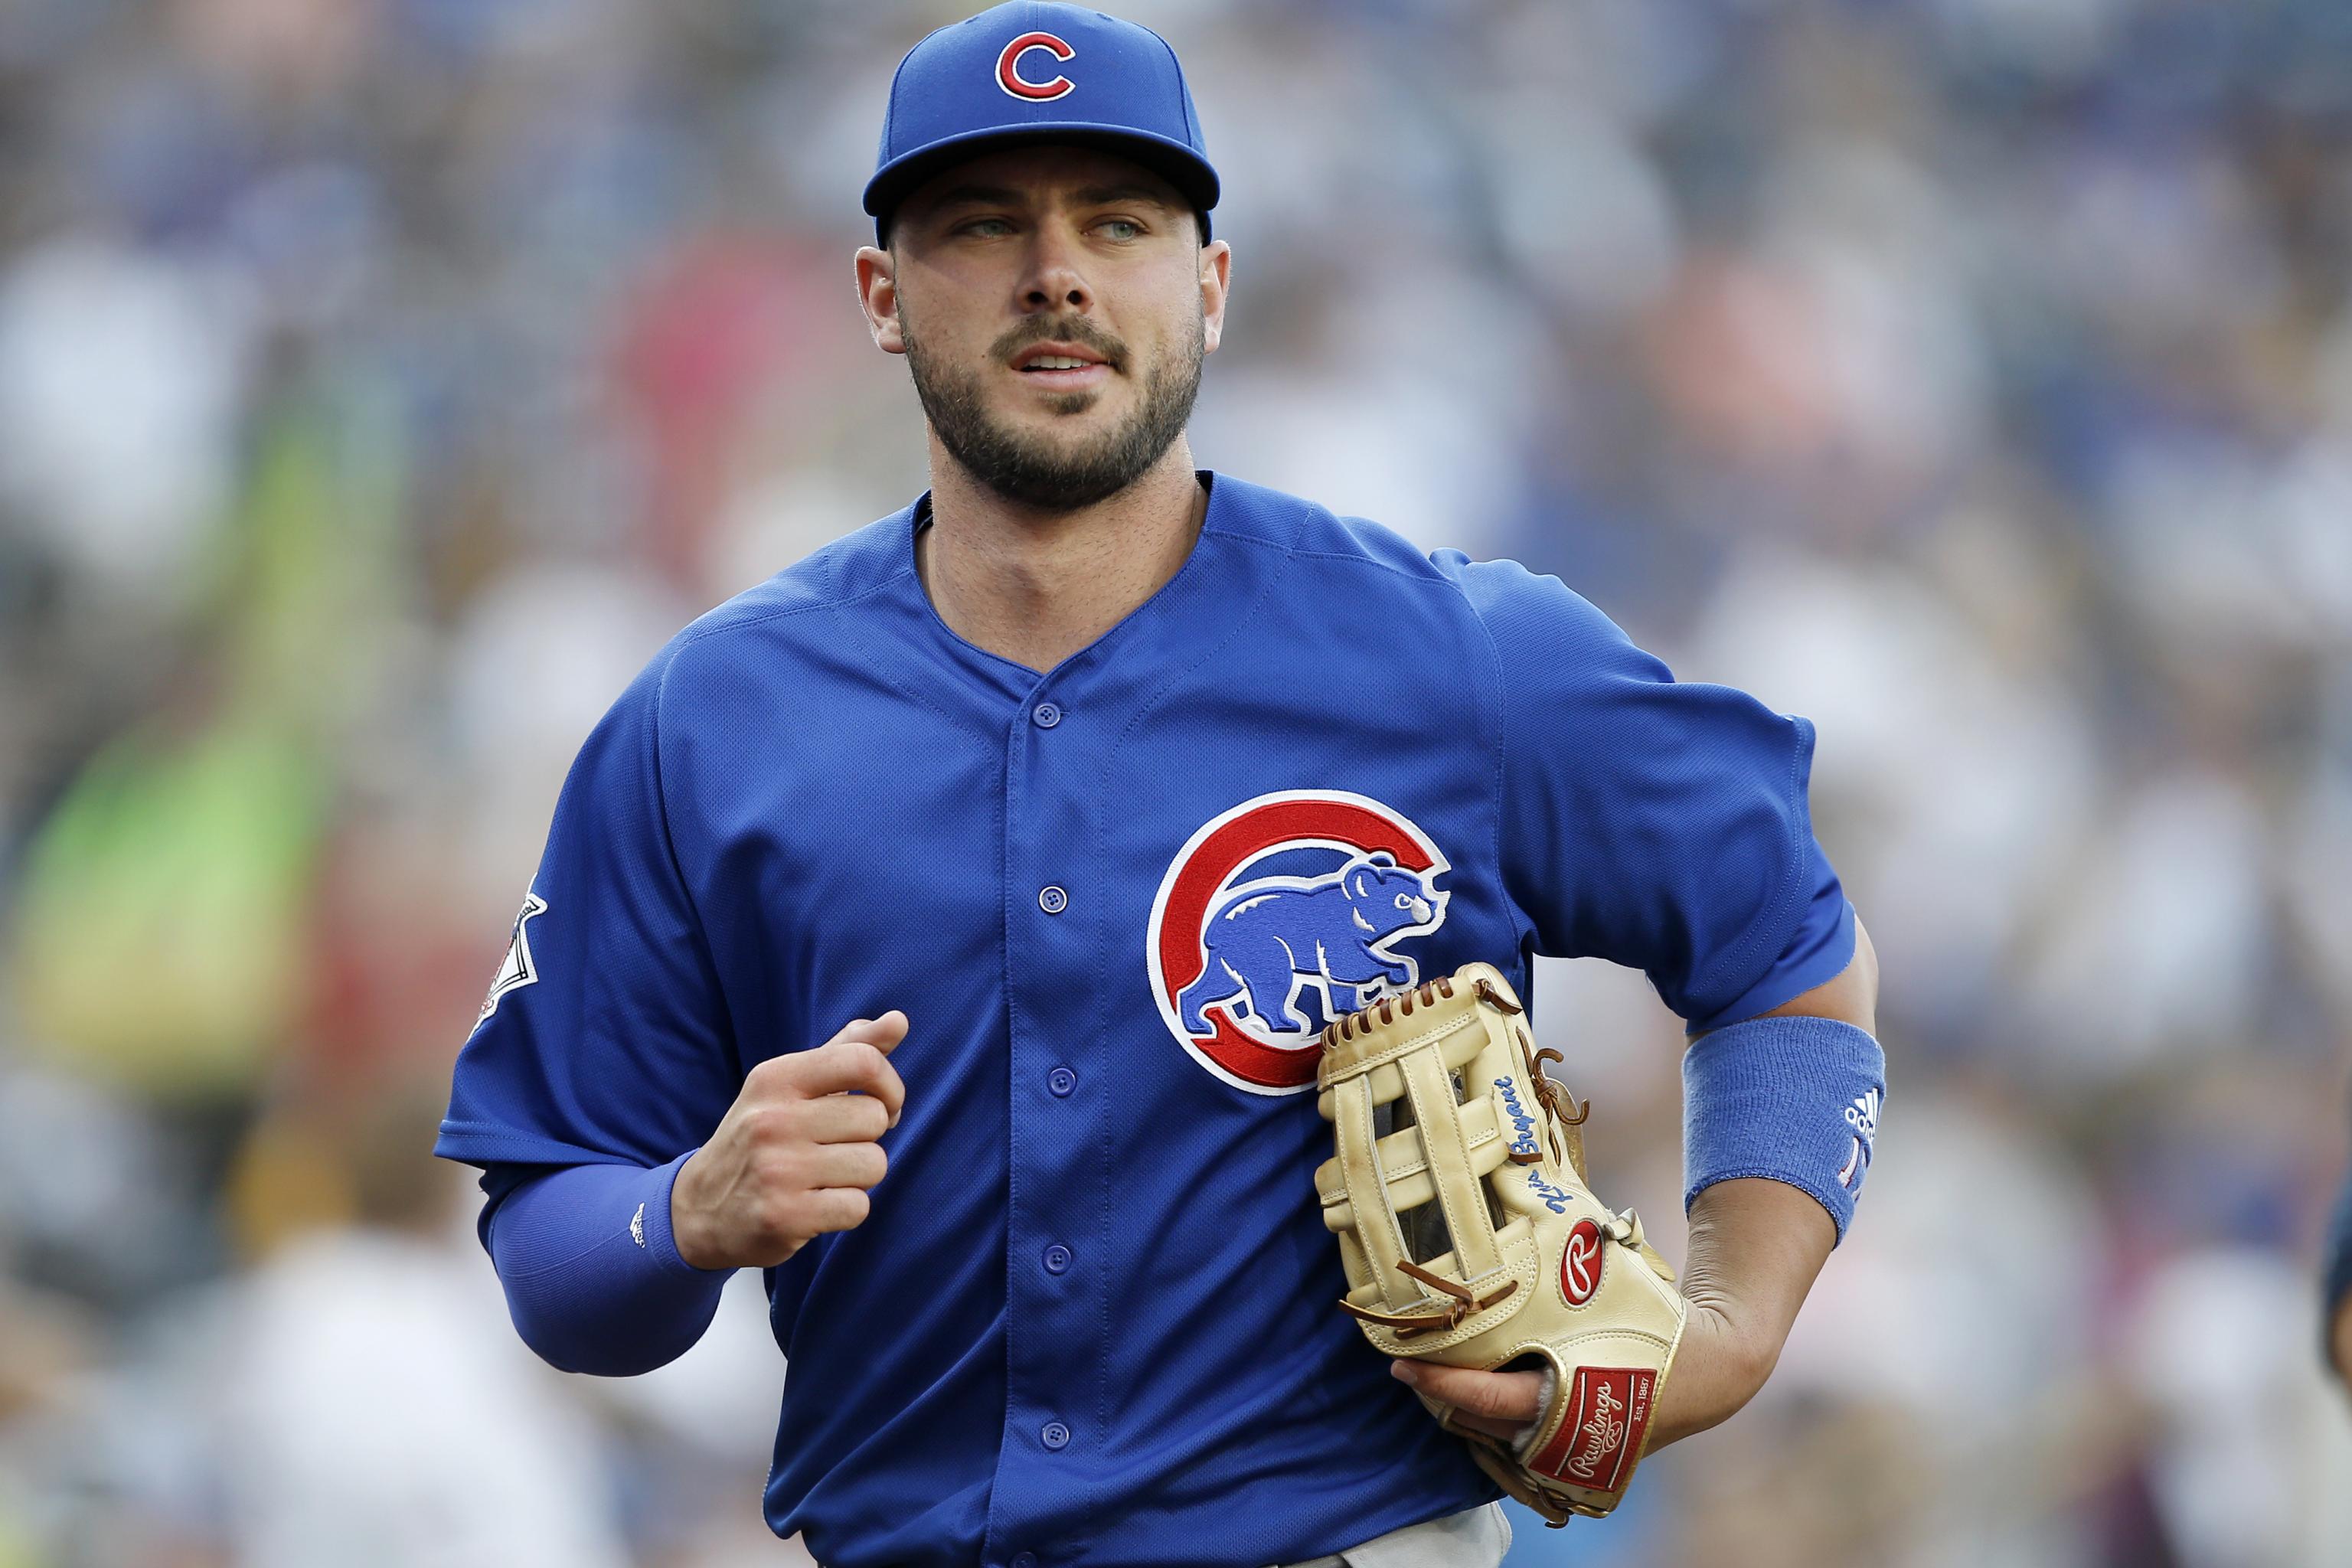 Kris Bryant of Cubs has baseball's most popular jersey